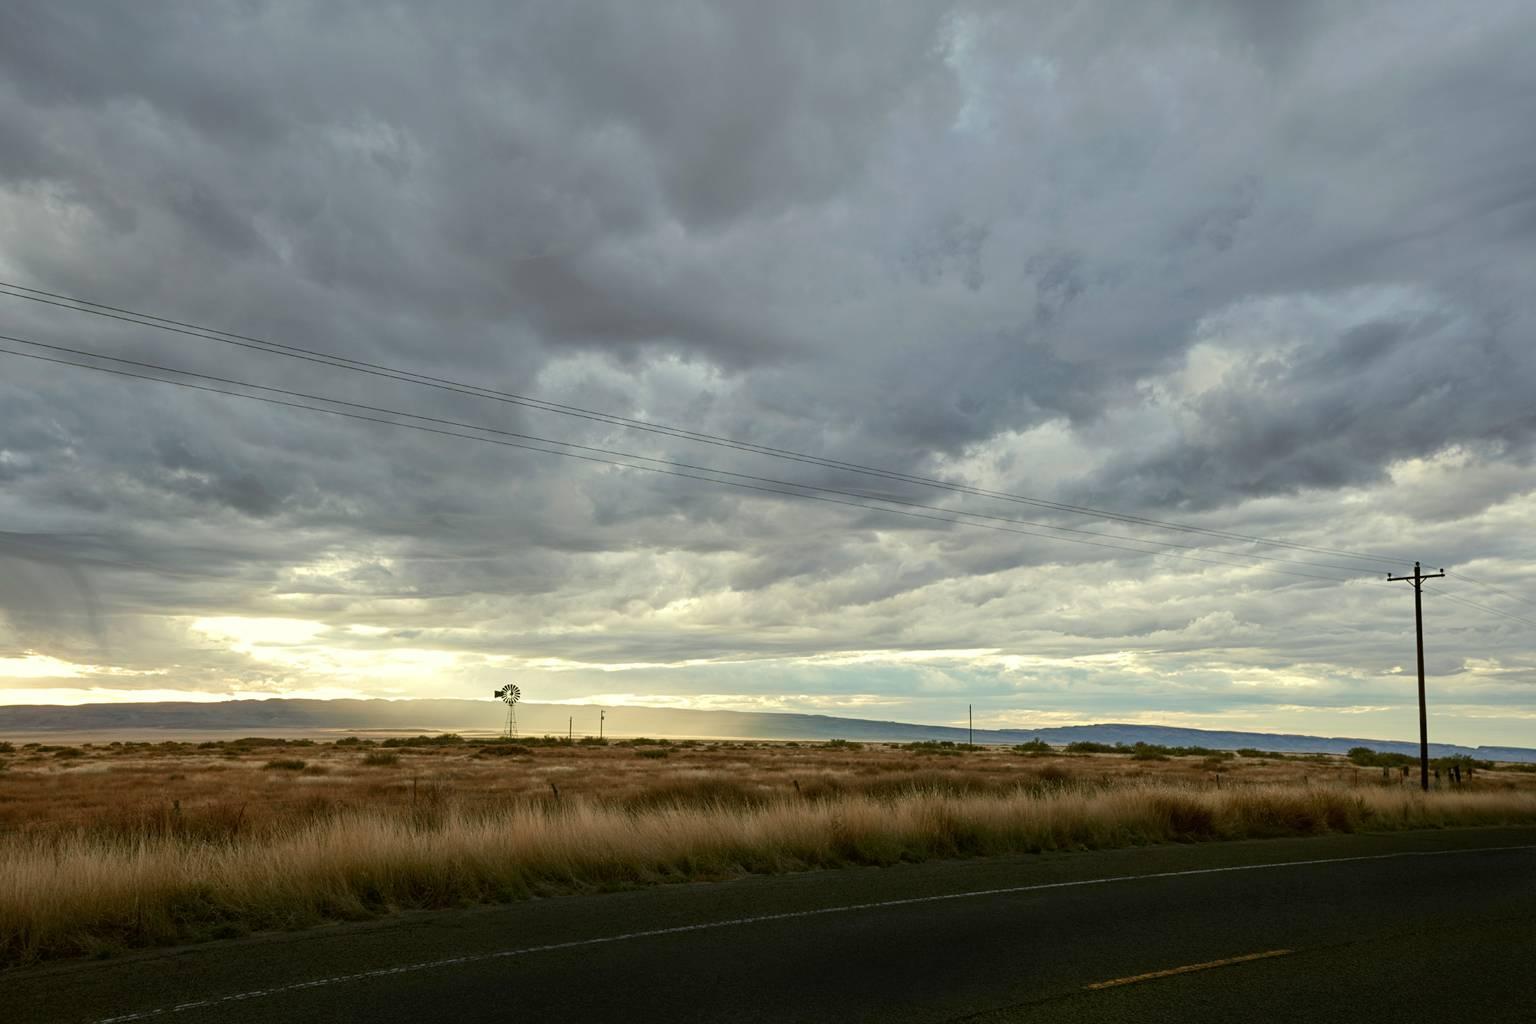 Frank Schott Landscape Photograph - Marfa ( Texas ) - large format photograph of dramatic clouds over endless fields